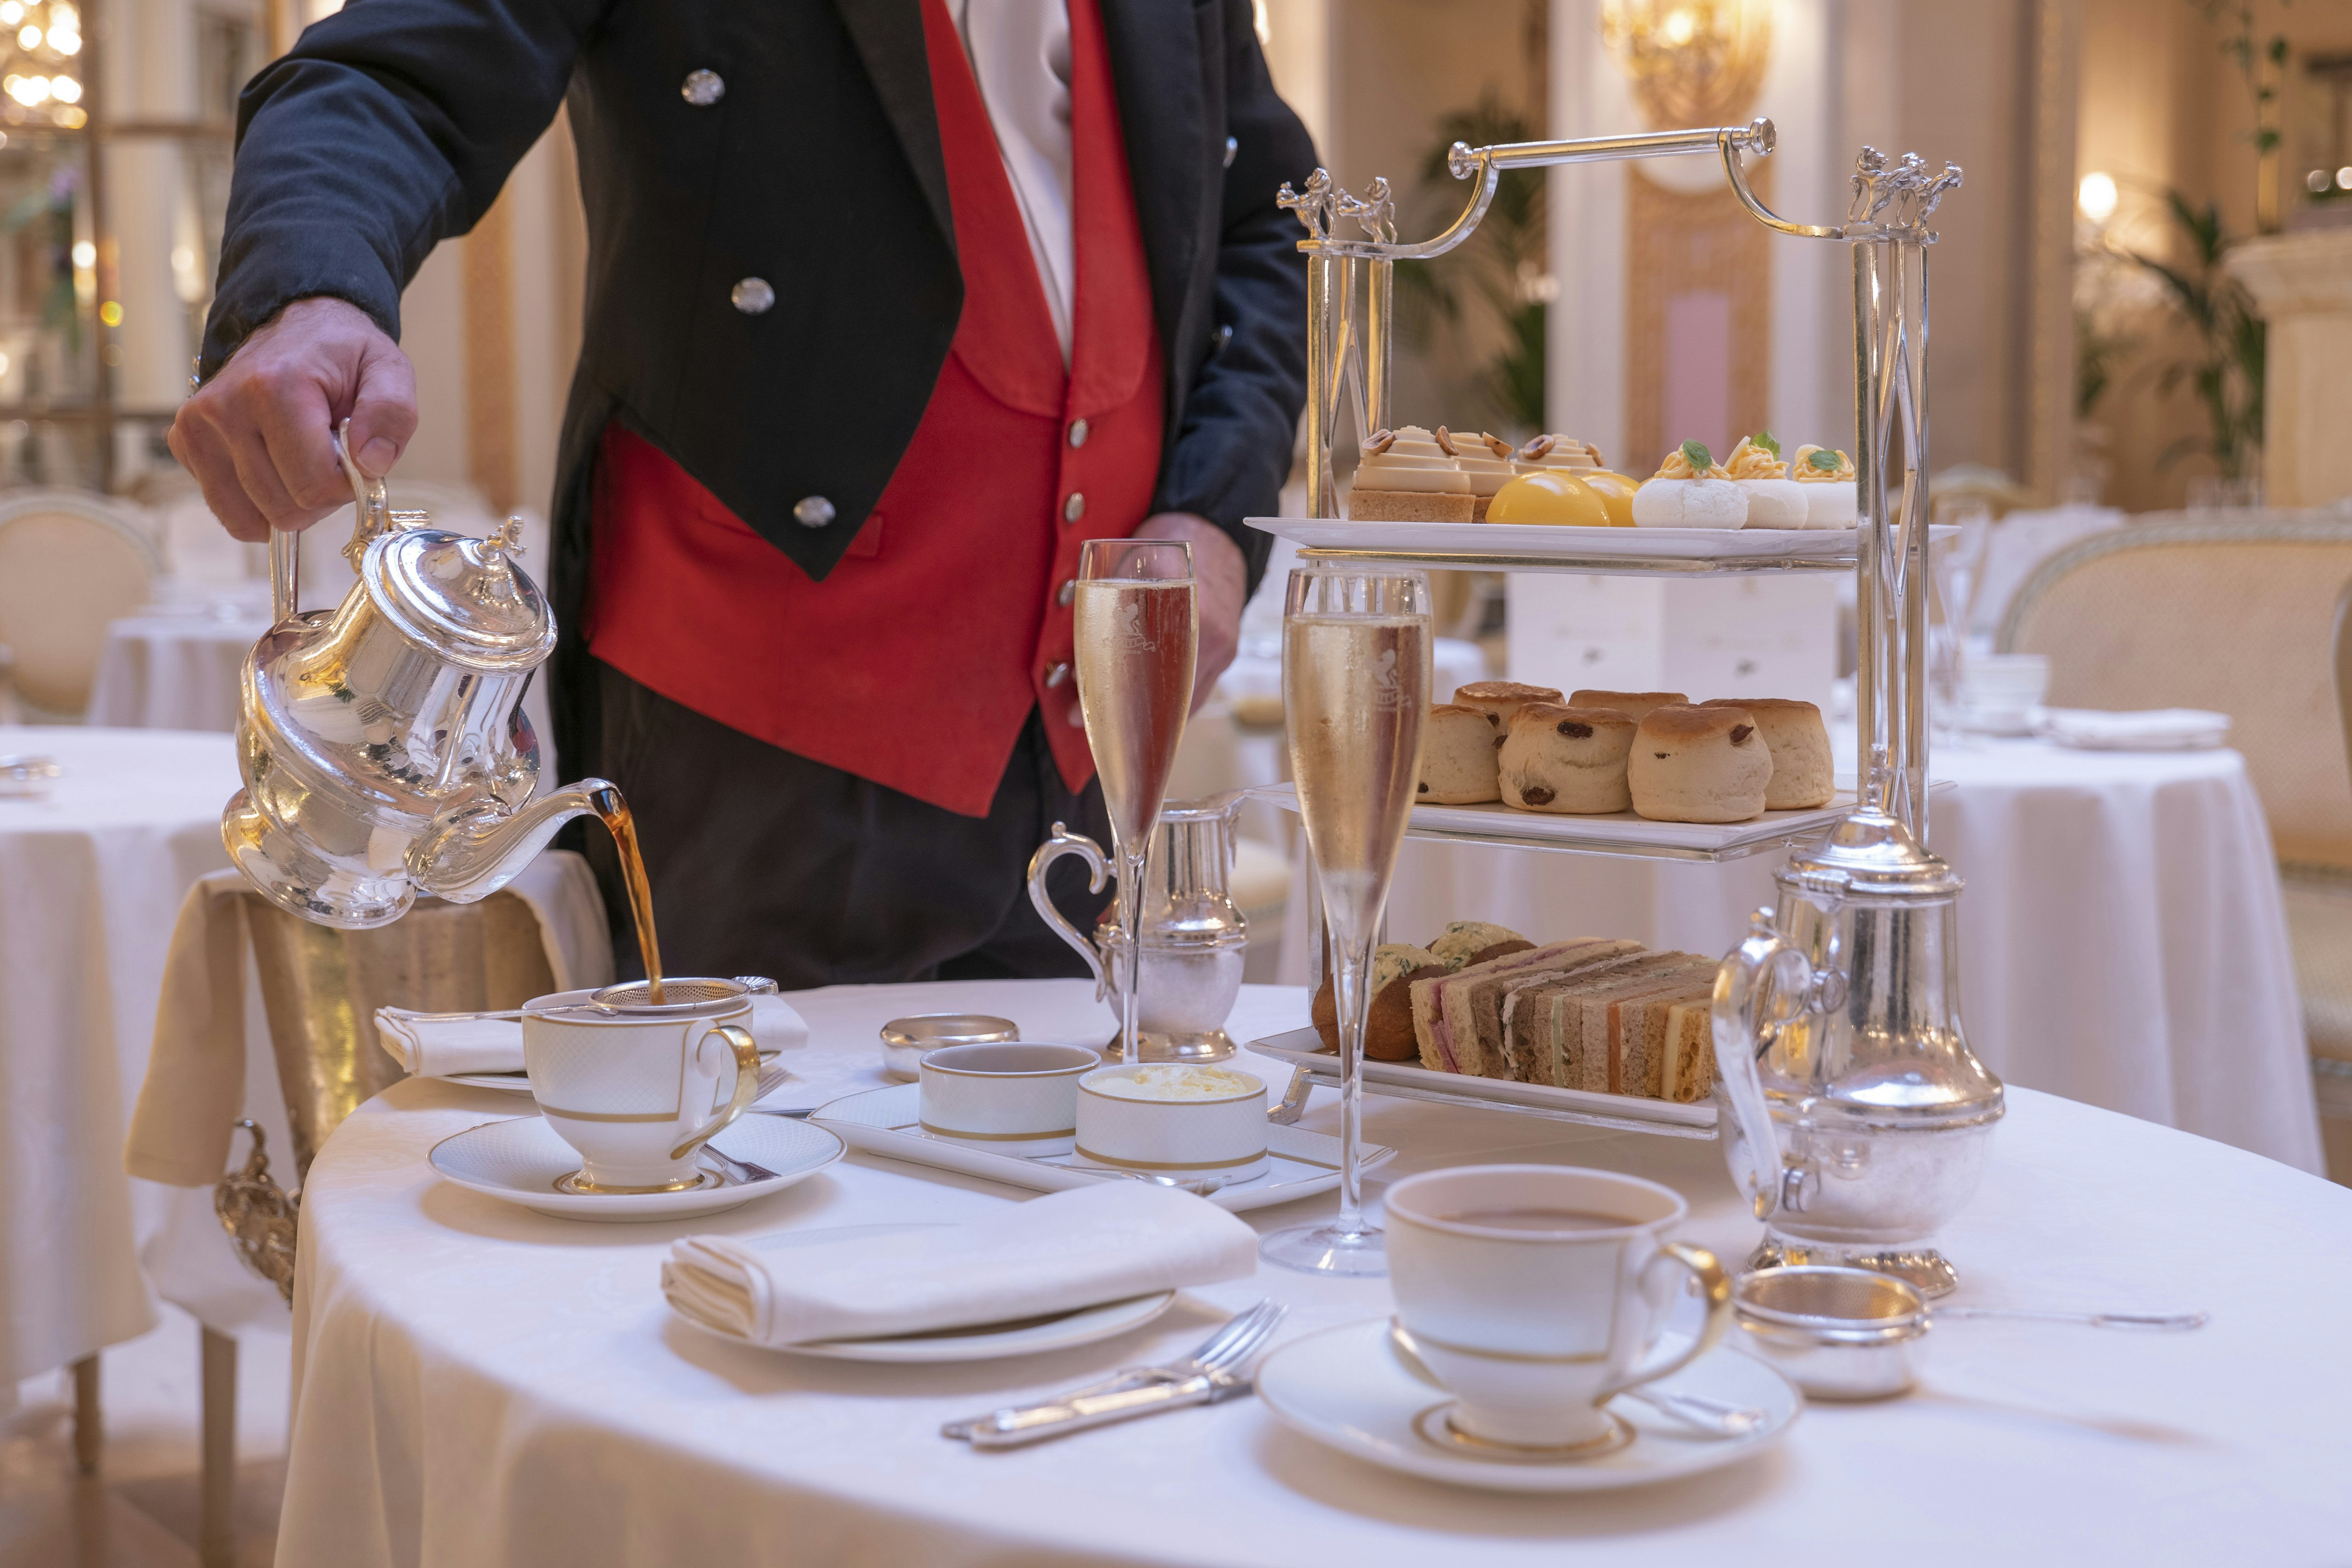 A smartly dressed waiter in a red waistcoat, seen at the mid-section only, pours tea from a shiny silver jug. A two-tier tray of cakes stands nearby, along with glasses of bubbly